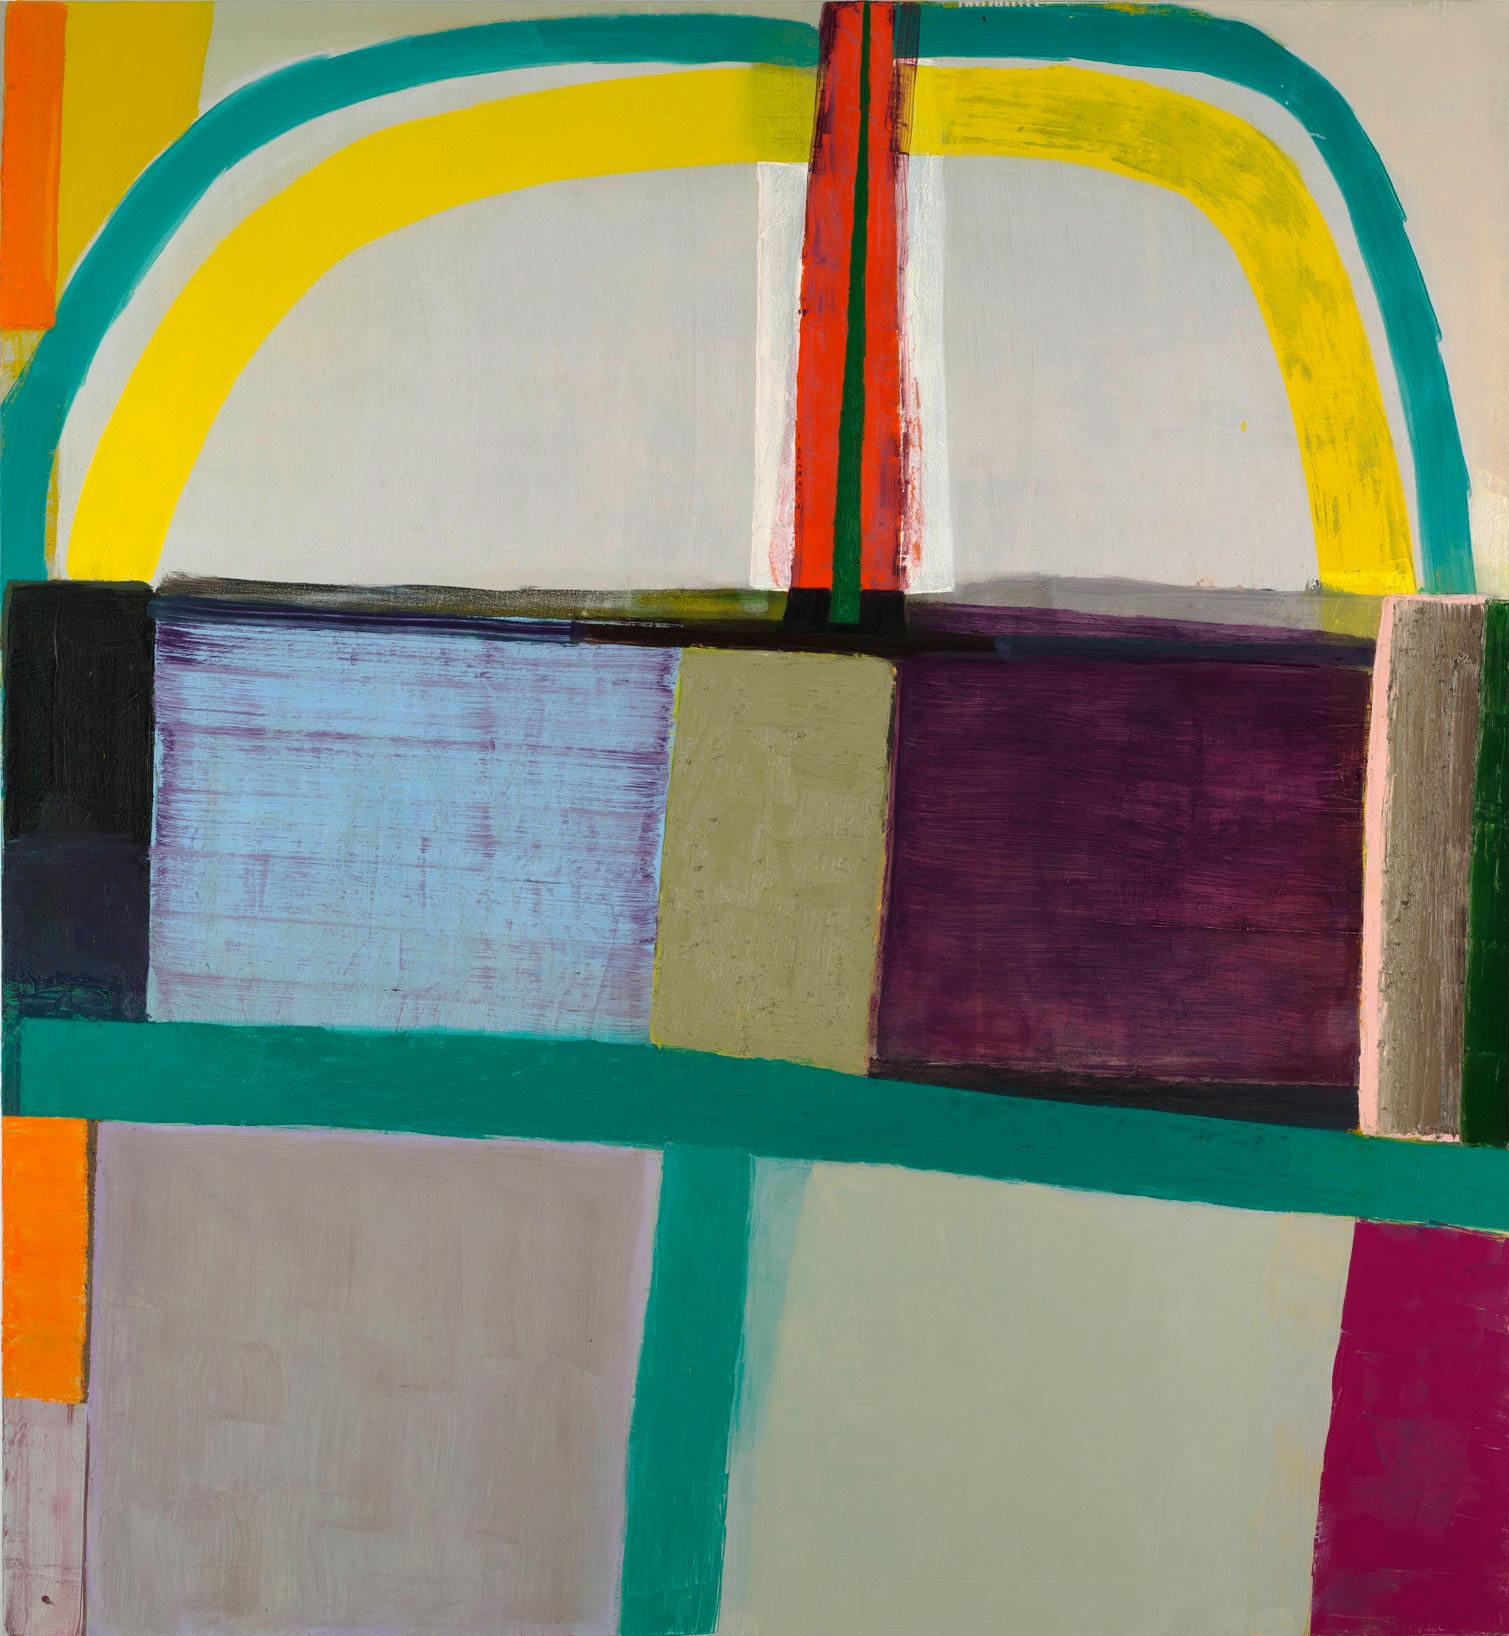 Whitney Biennial 2014 Amy-Sillman Mother 2013-14 Painting